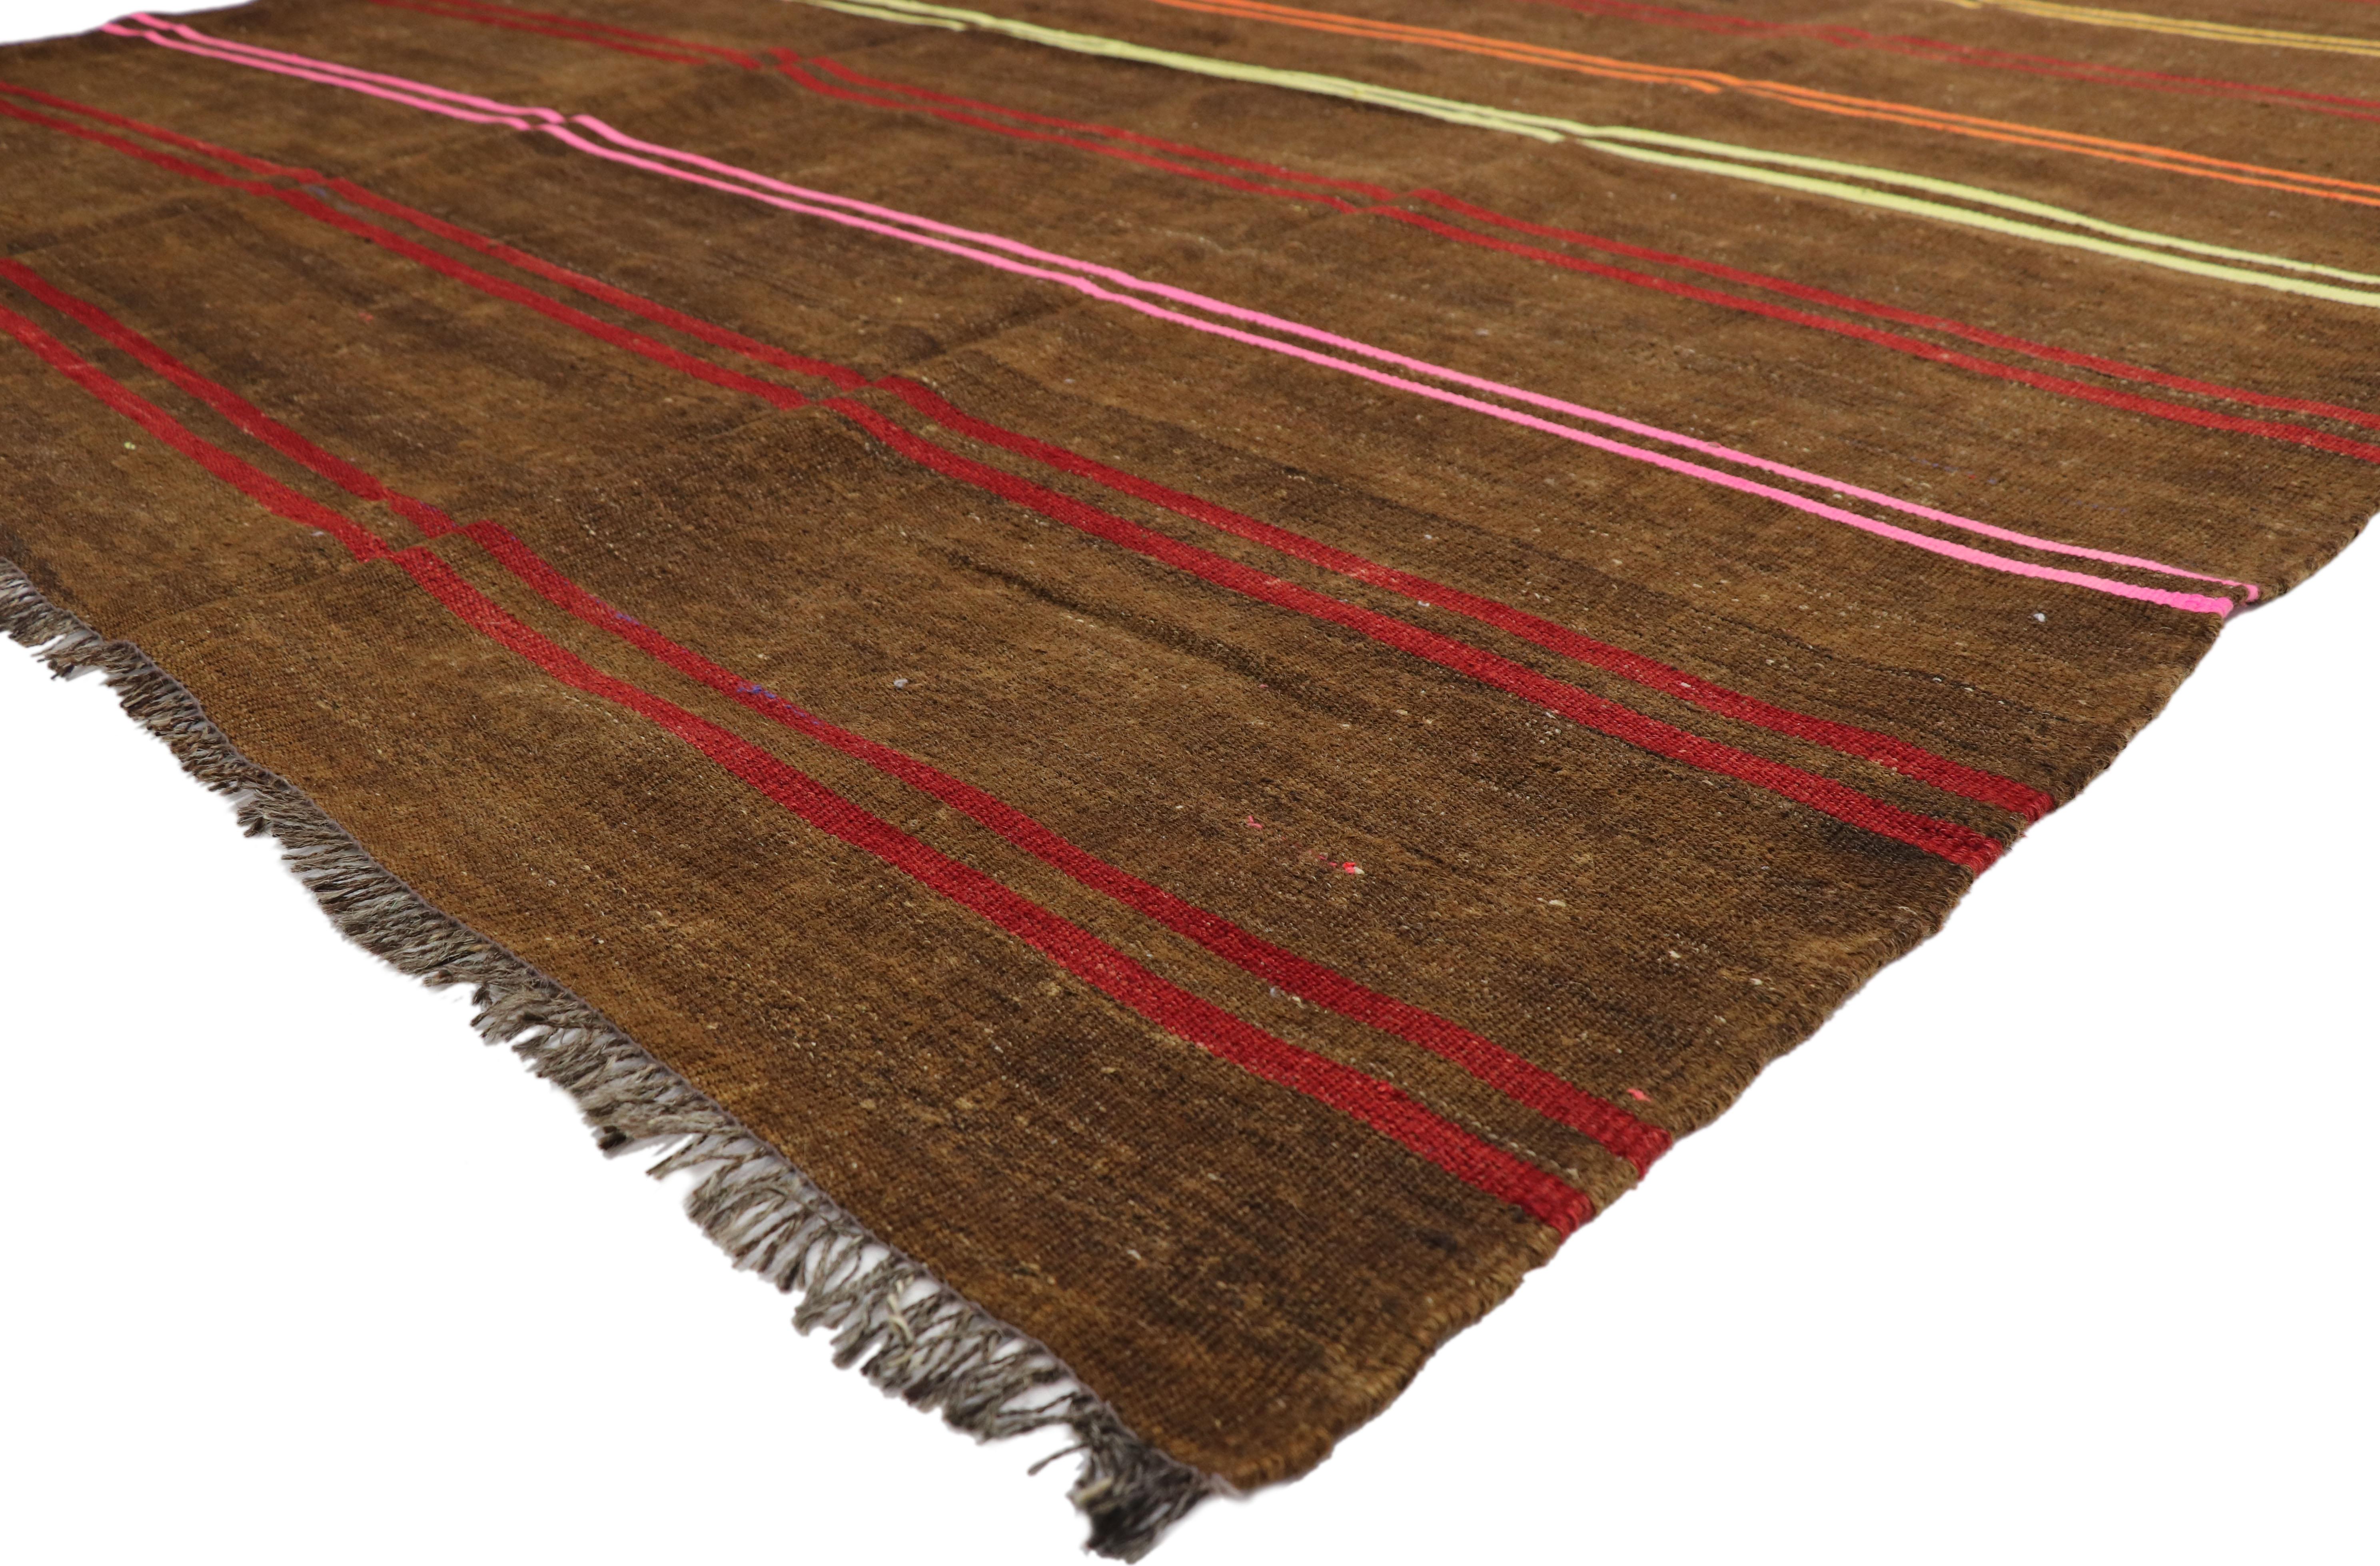 51334, vintage Turkish Striped Kilim Area rug with Bohemian Tribal style. This handwoven wool vintage Turkish Kilim rug features a series of thin bright double bands woven horizontally across a chocolate brown background. The poly-chromatic stripes